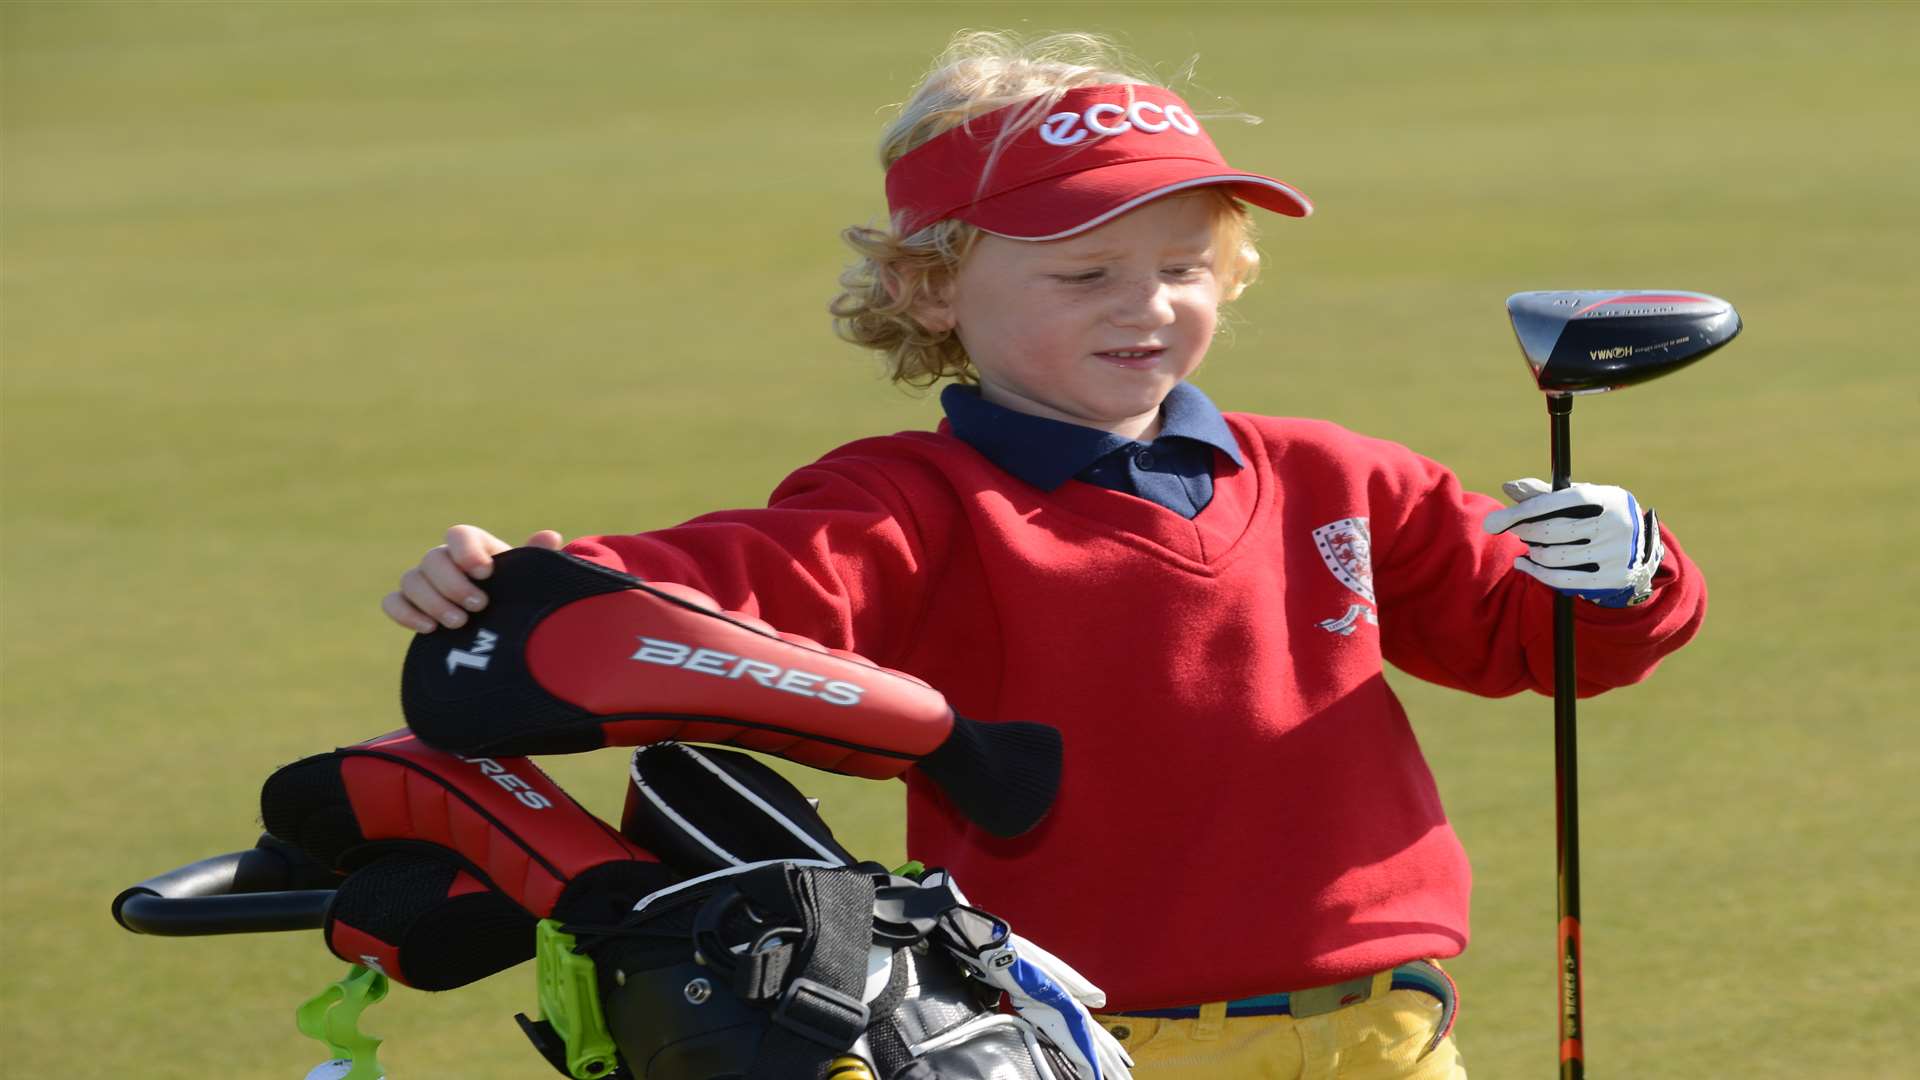 Arthur Saunders, five, is competing in a USA golfing championship. Picture: Gary Browne